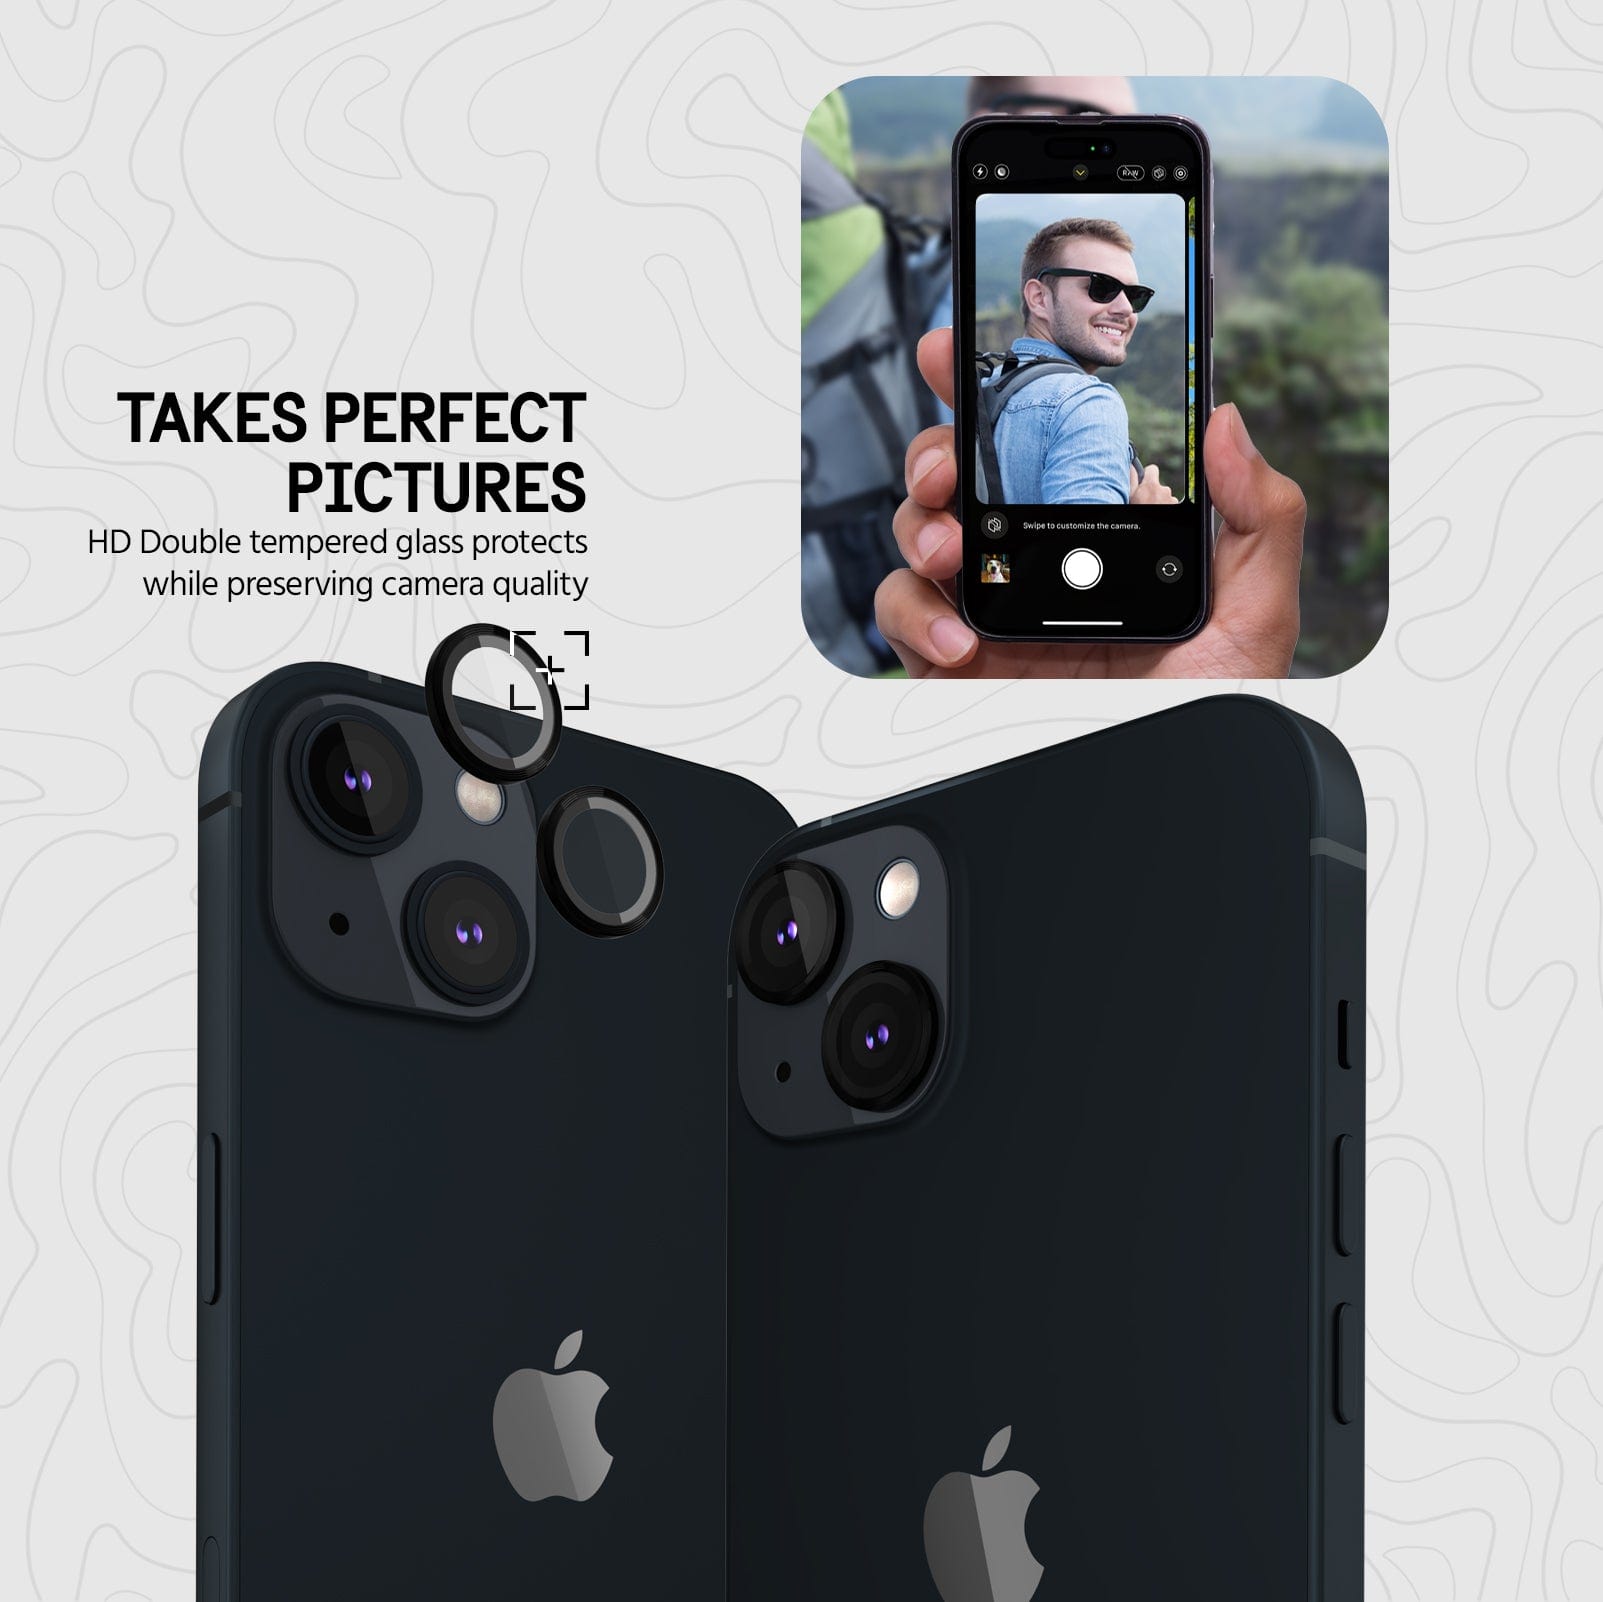 TAKES PERFECT PICTURES. HD tempered glass protects while preserving camera quality.